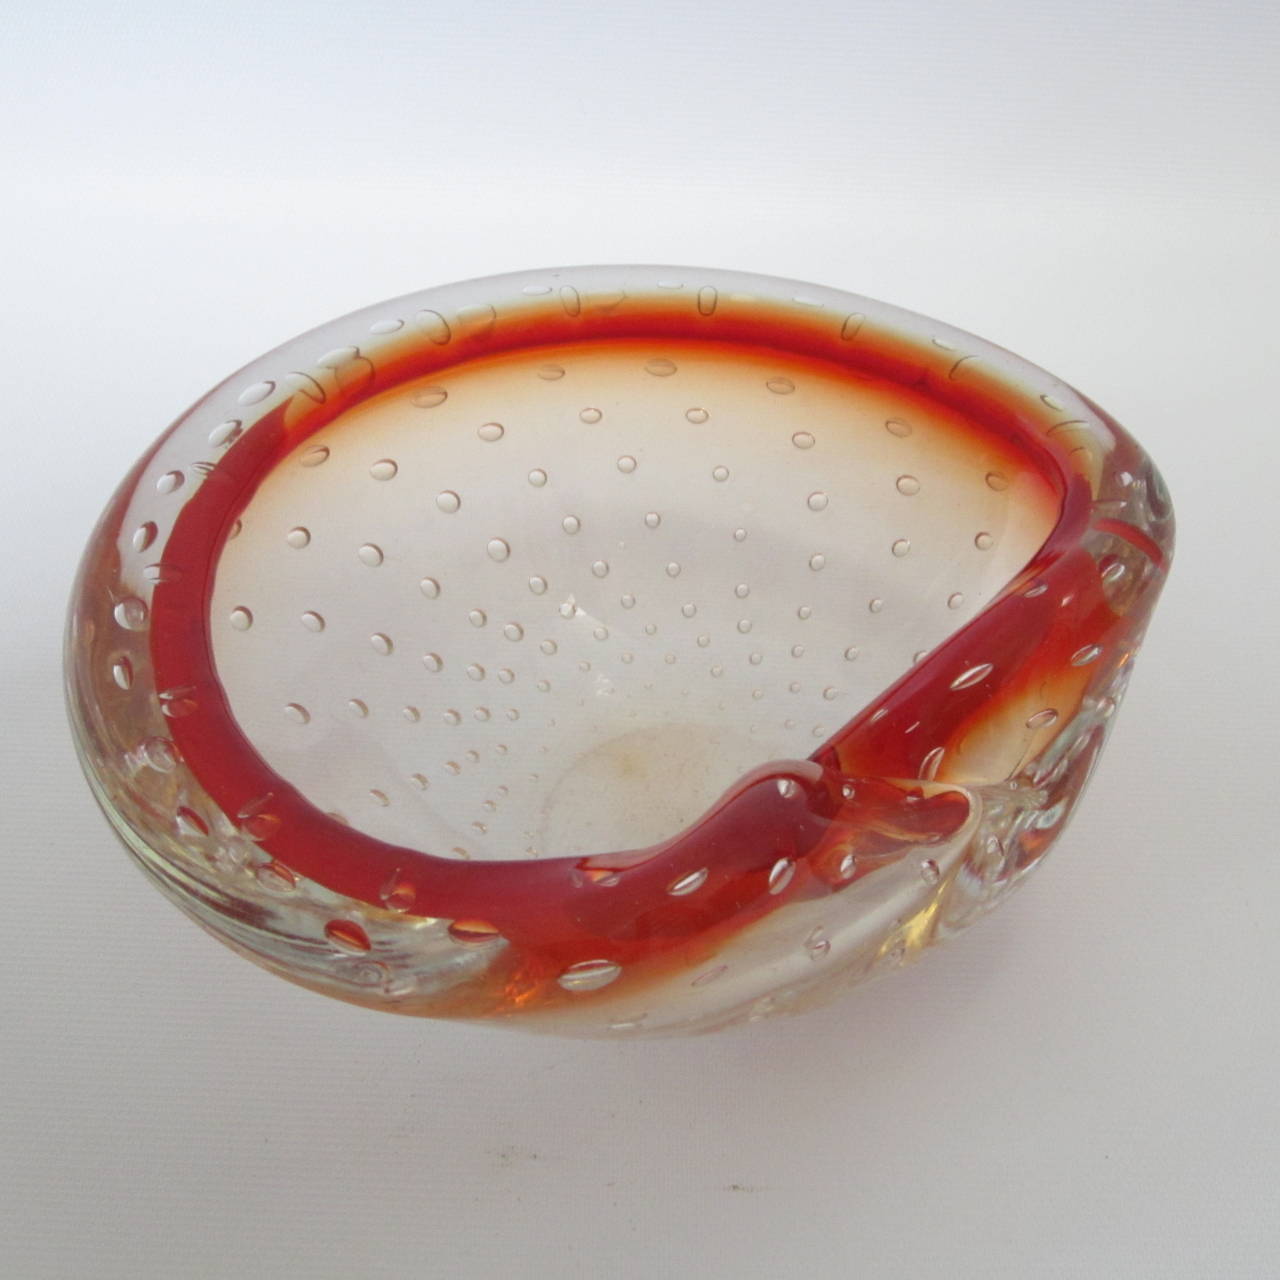 Lovely handblown Murano glass dish or bowl with turned down side. Clear glass filled with bubble inclusions while rim is deep orange.